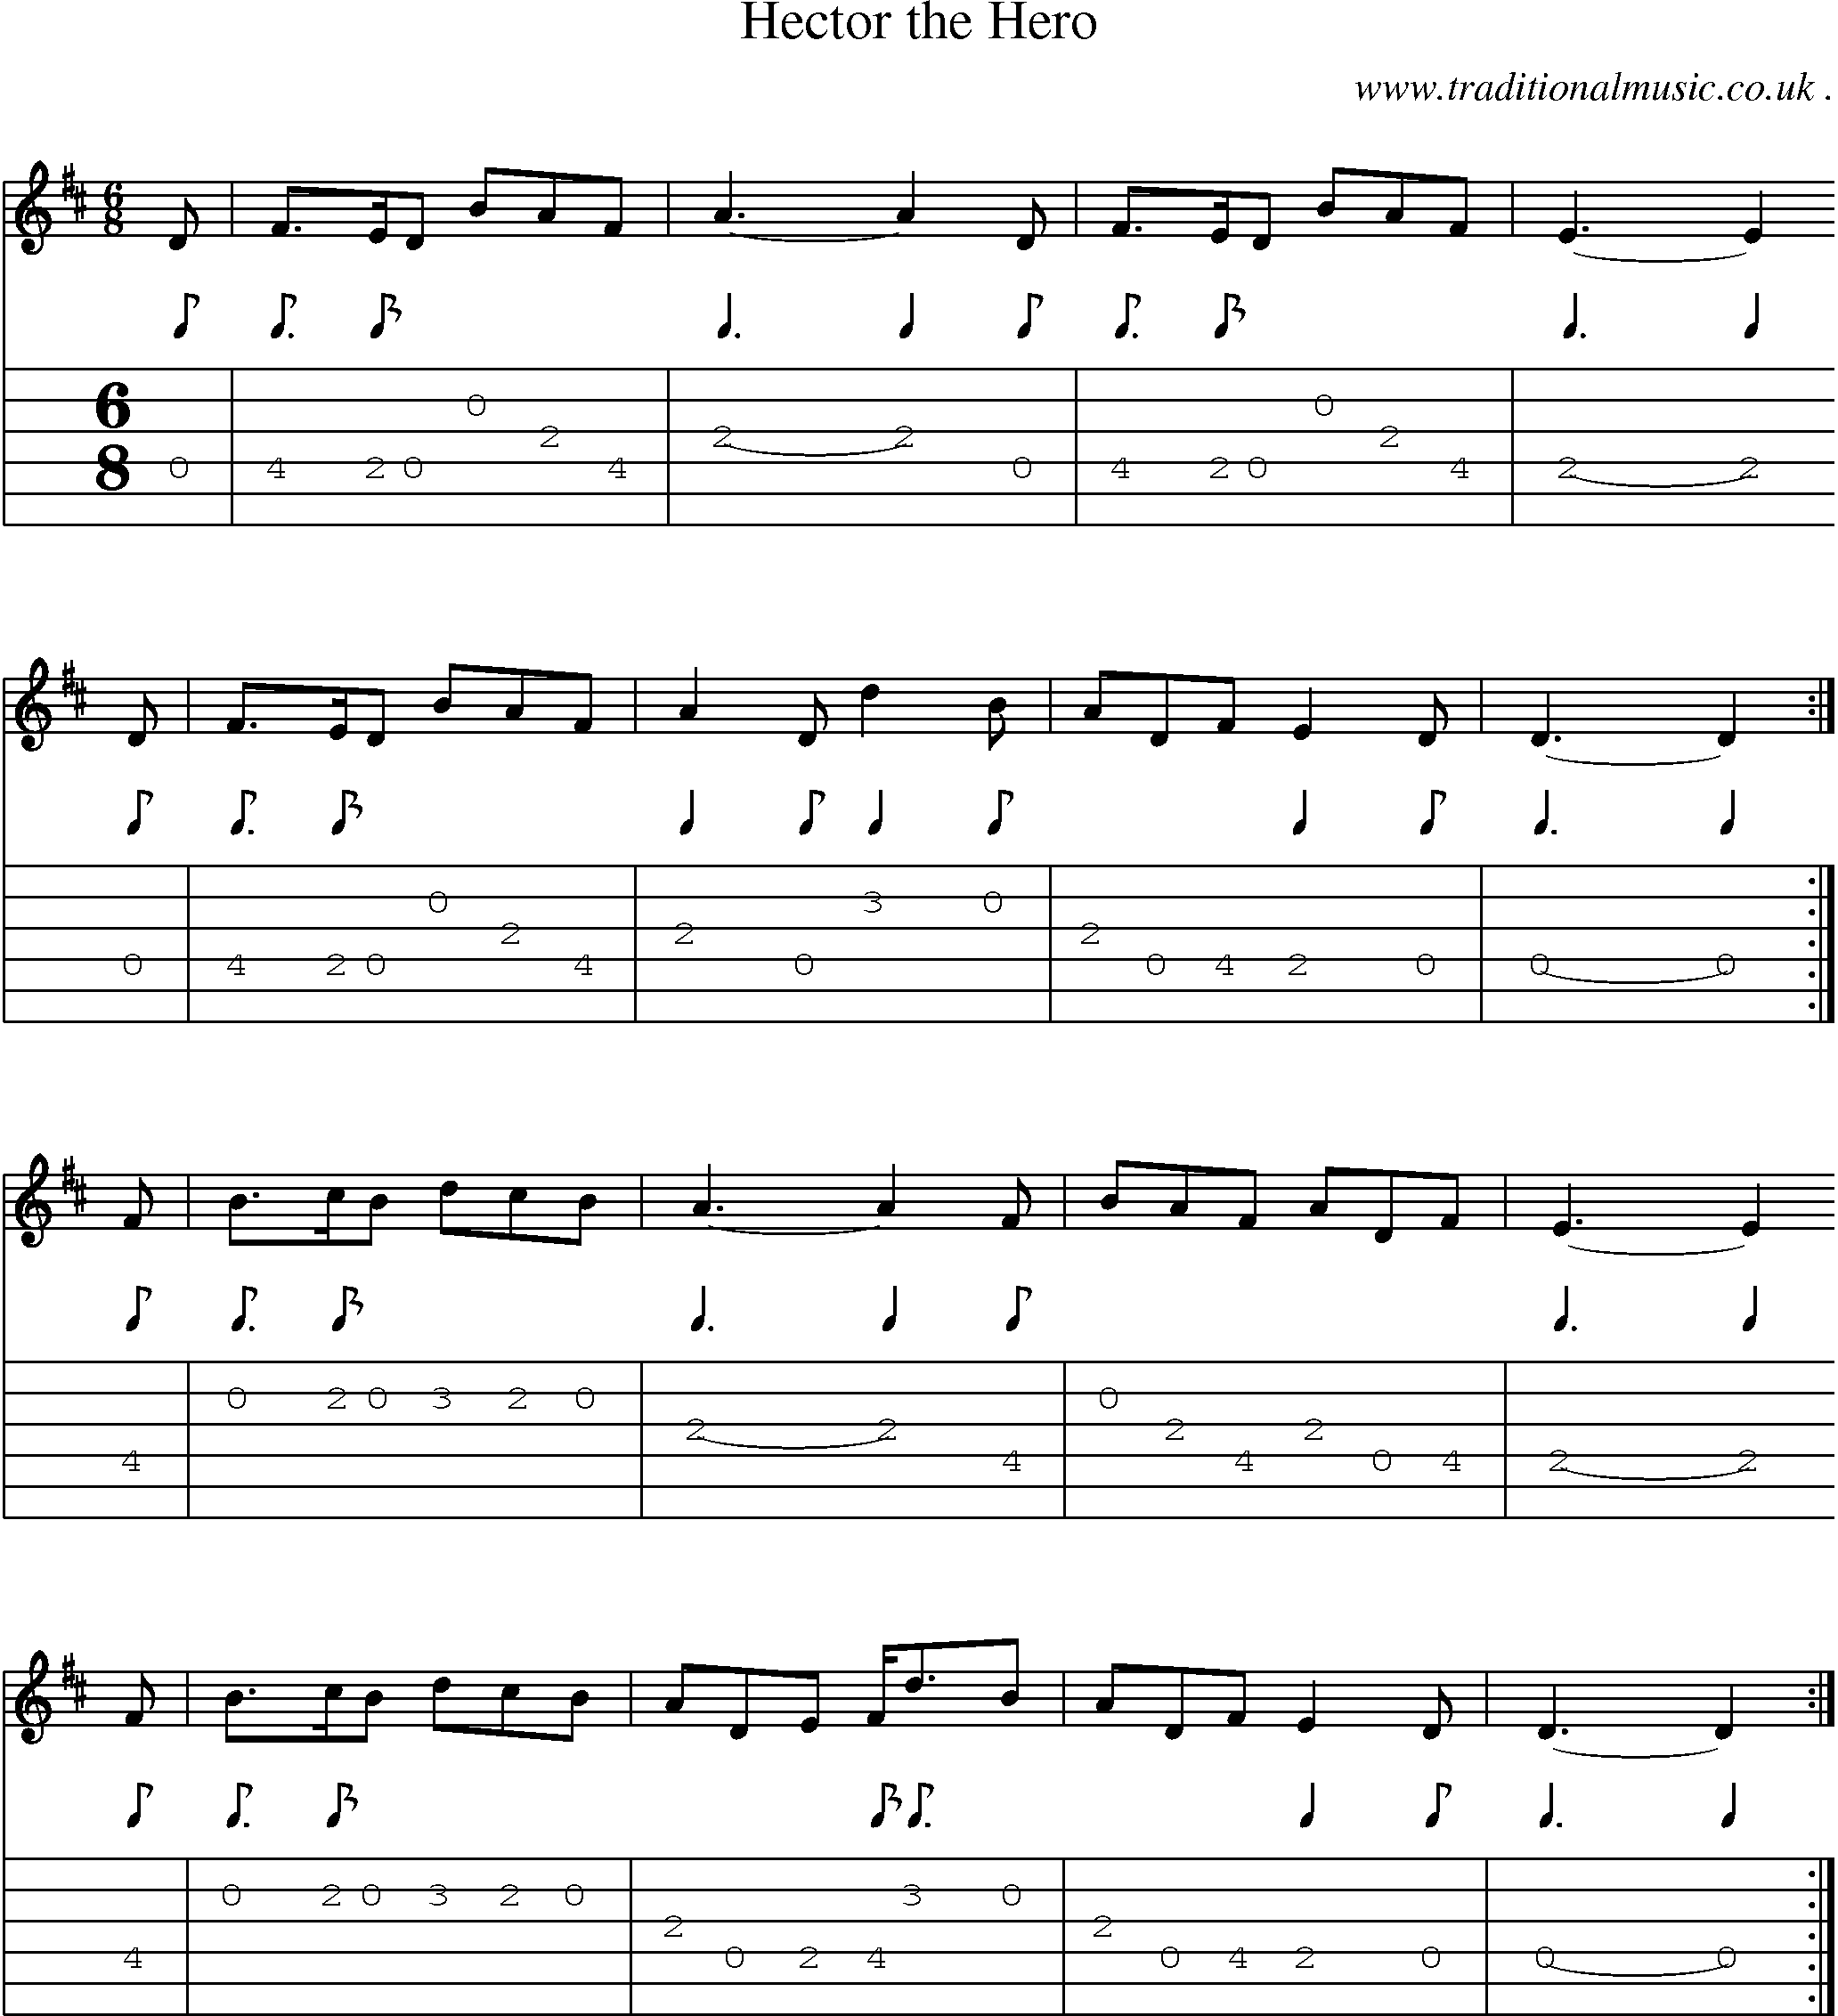 Sheet-music  score, Chords and Guitar Tabs for Hector The Hero